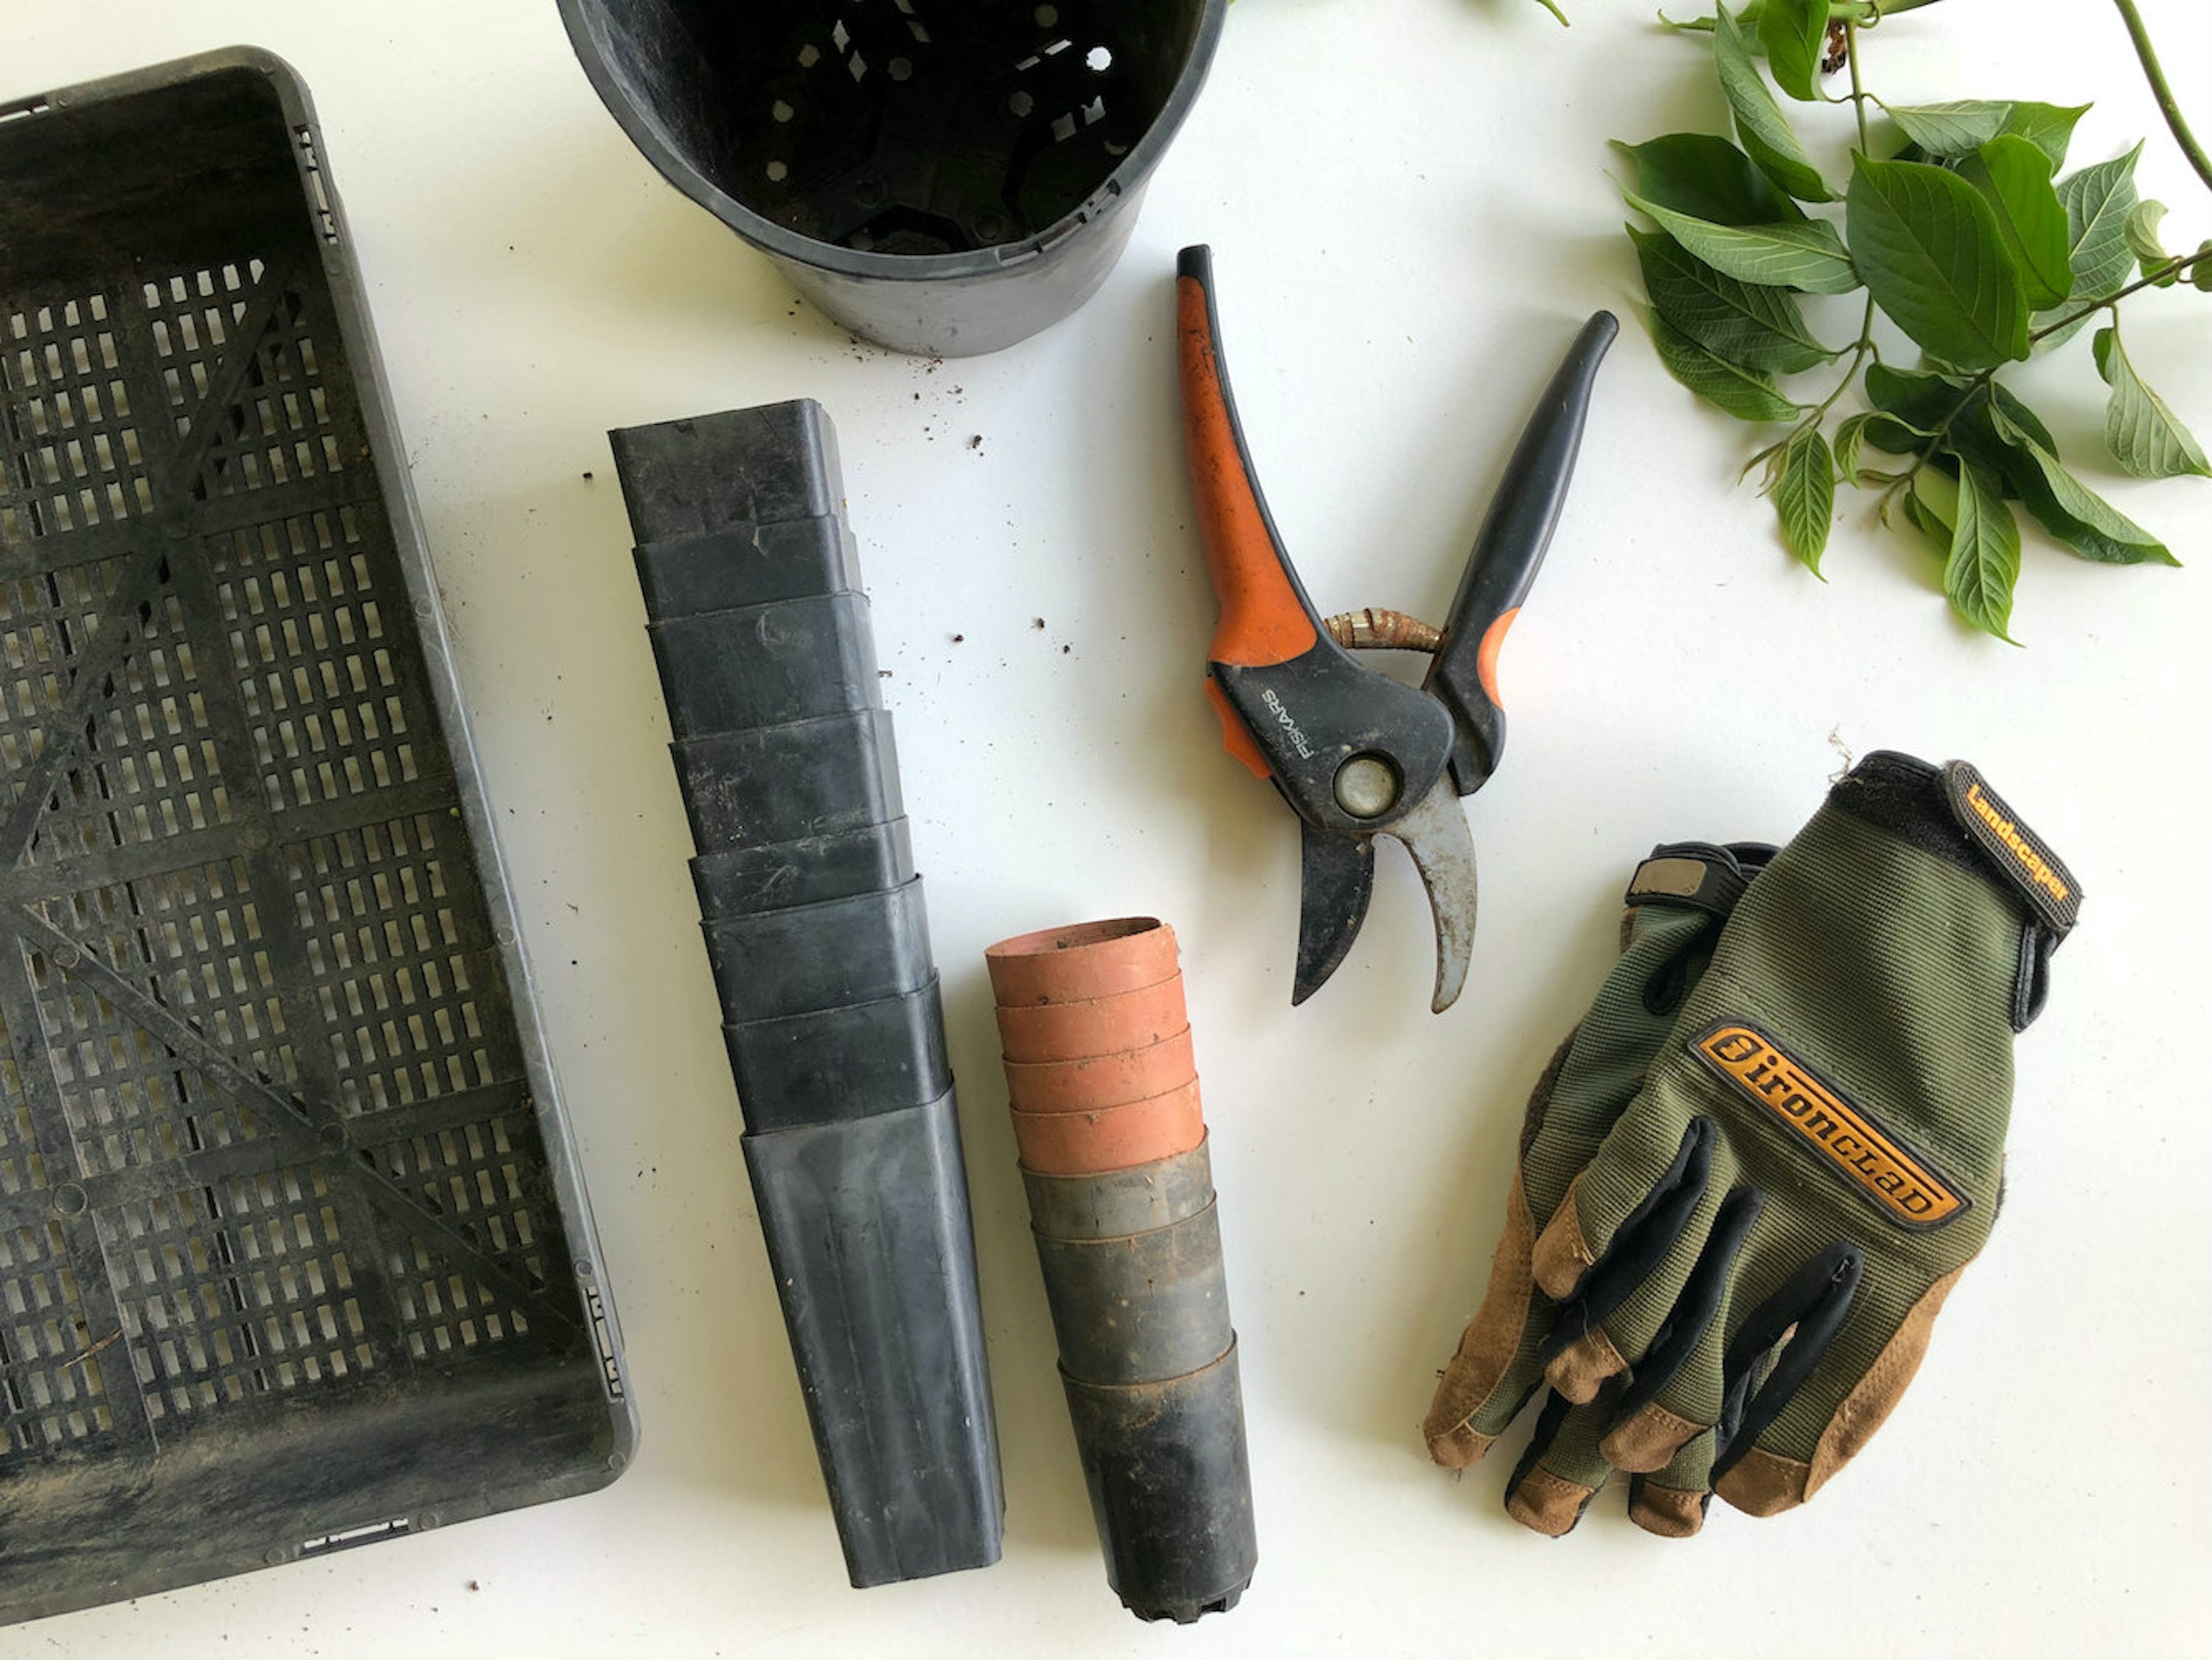 Gardening tools and a table